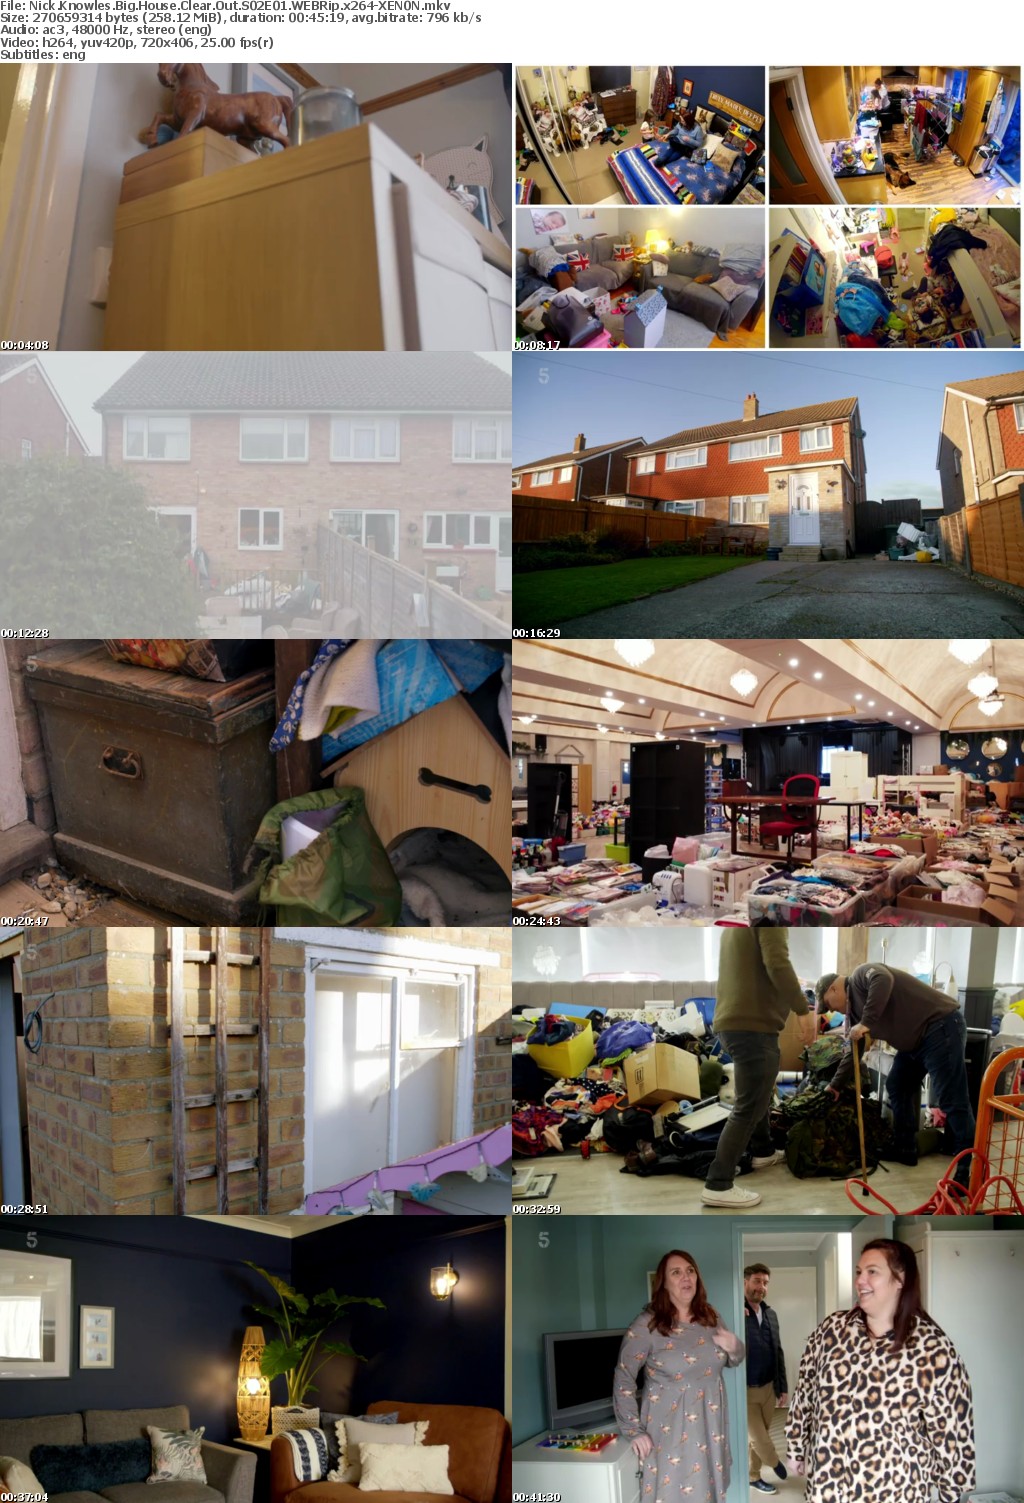 Nick Knowles Big House Clear Out S02E01 WEBRip x264-XEN0N